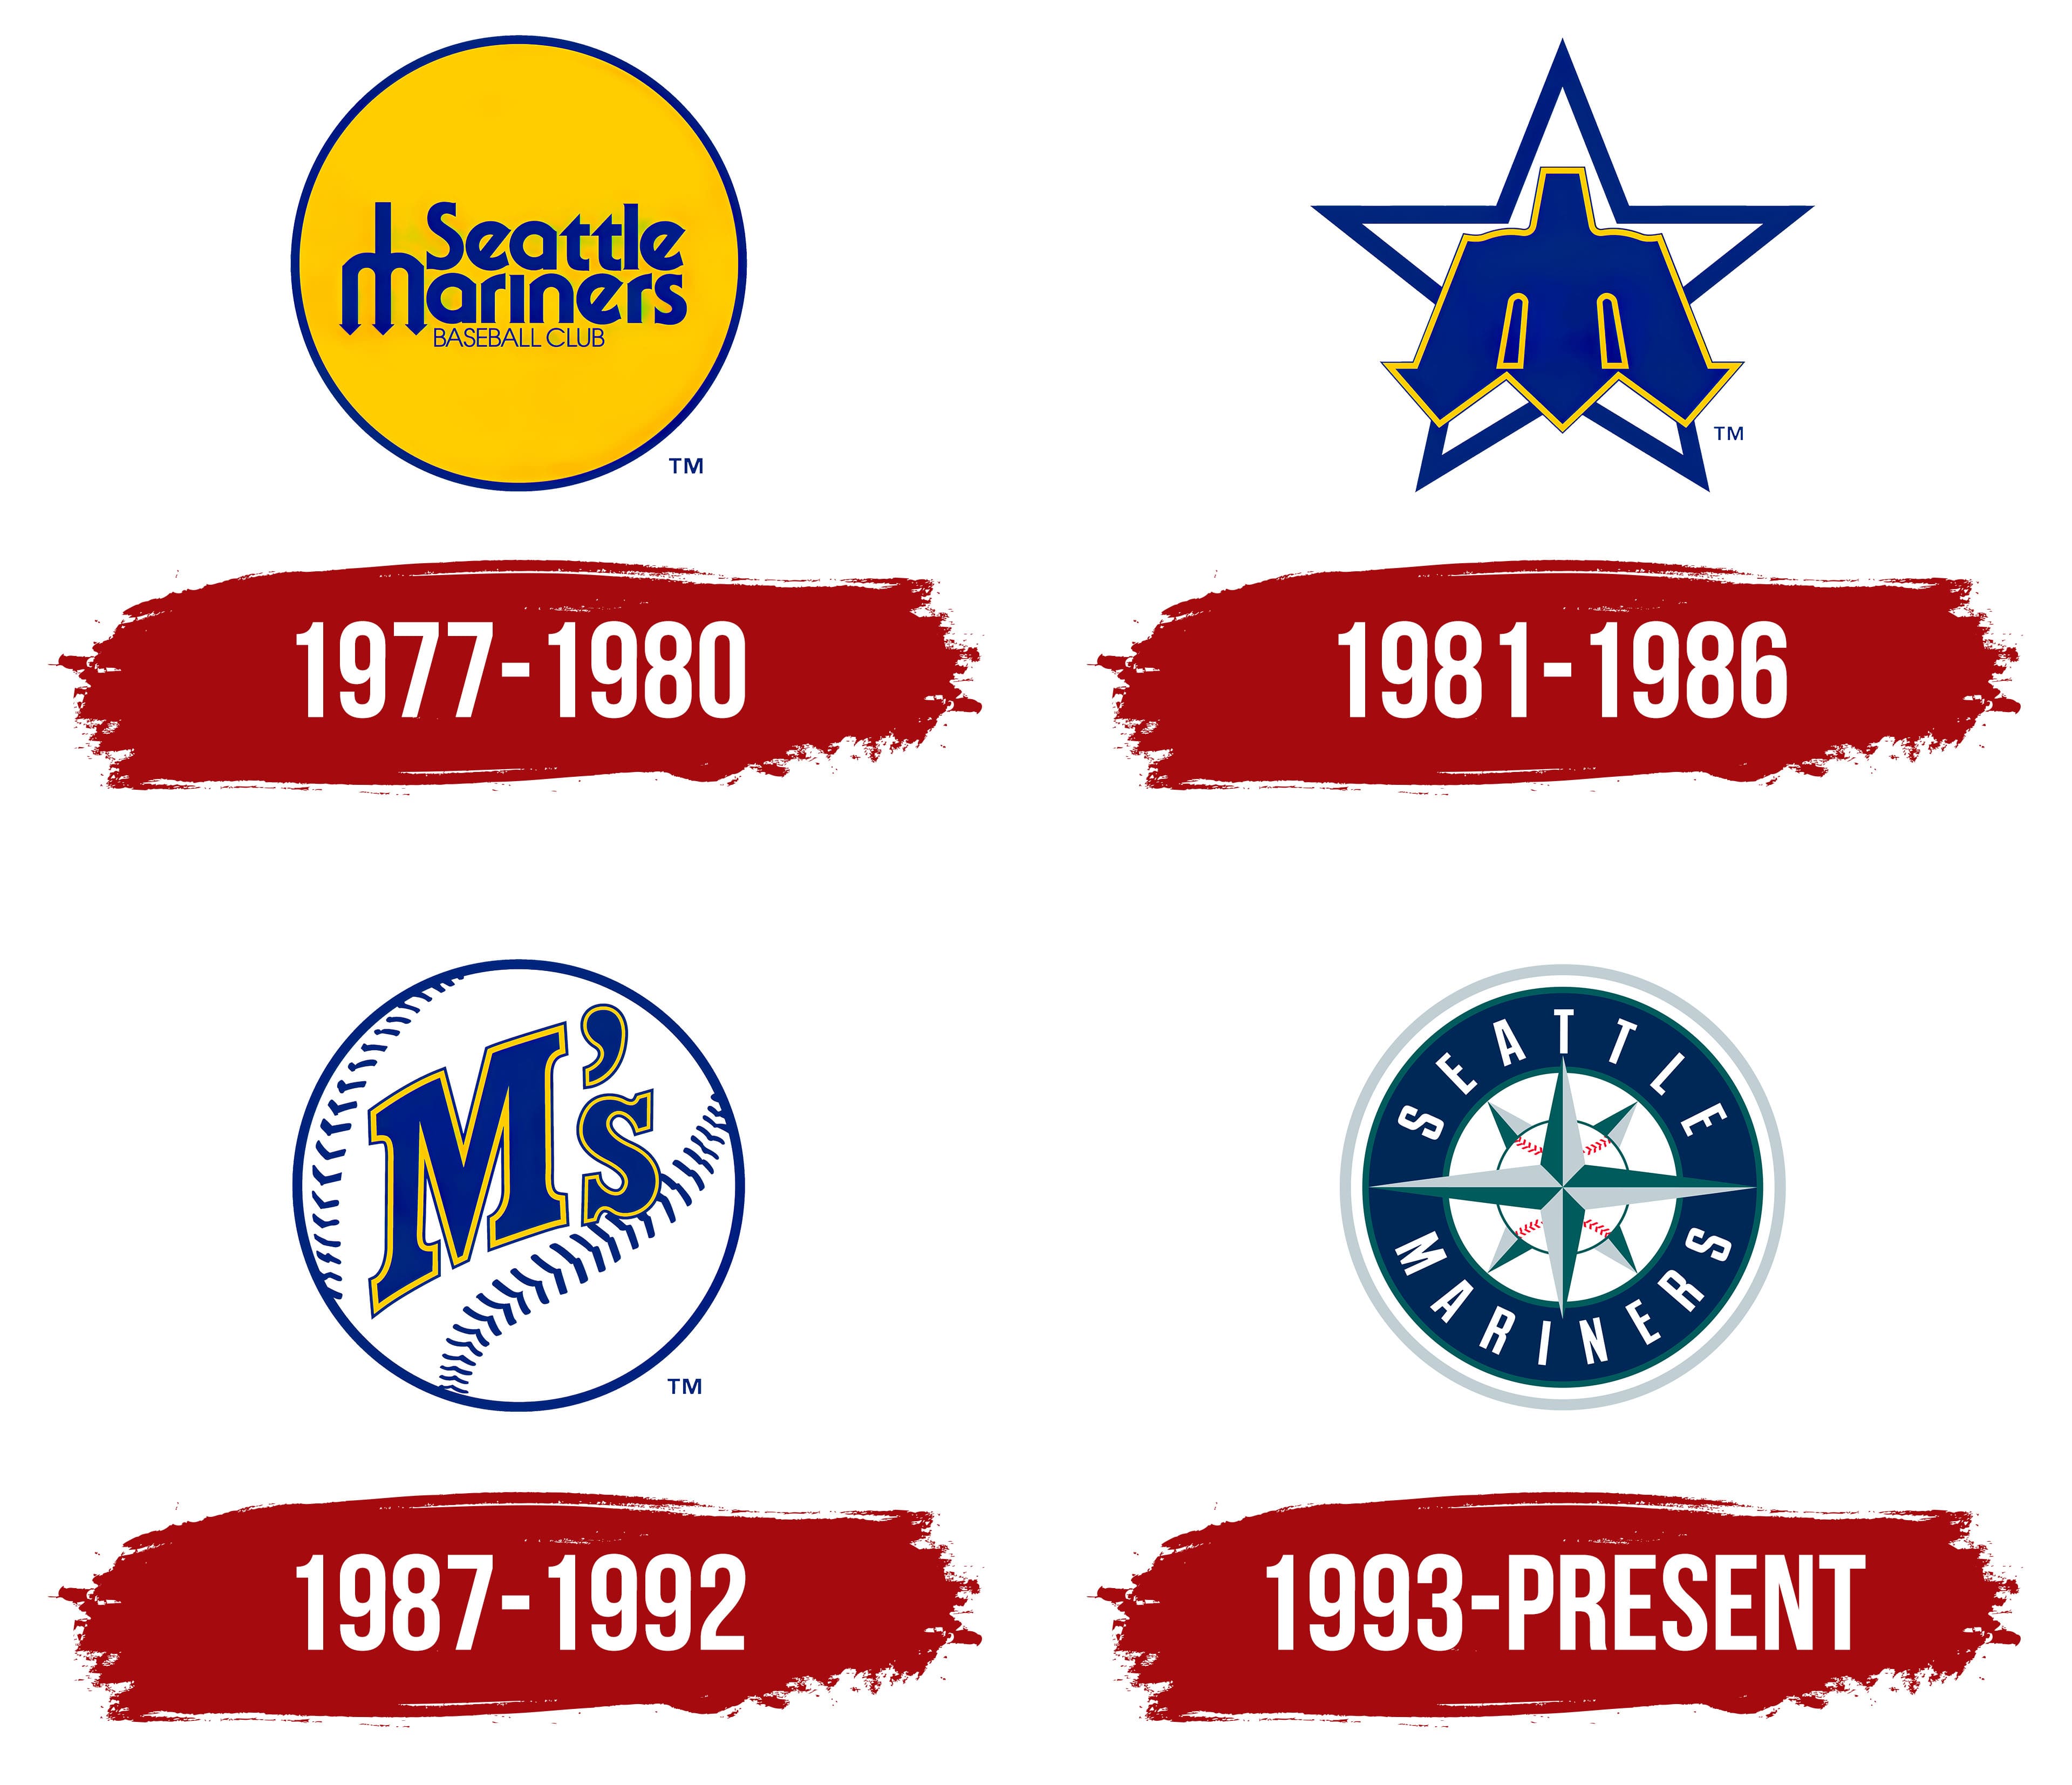 File:Seattle Mariners logo 1977 to 1979.png - Wikipedia